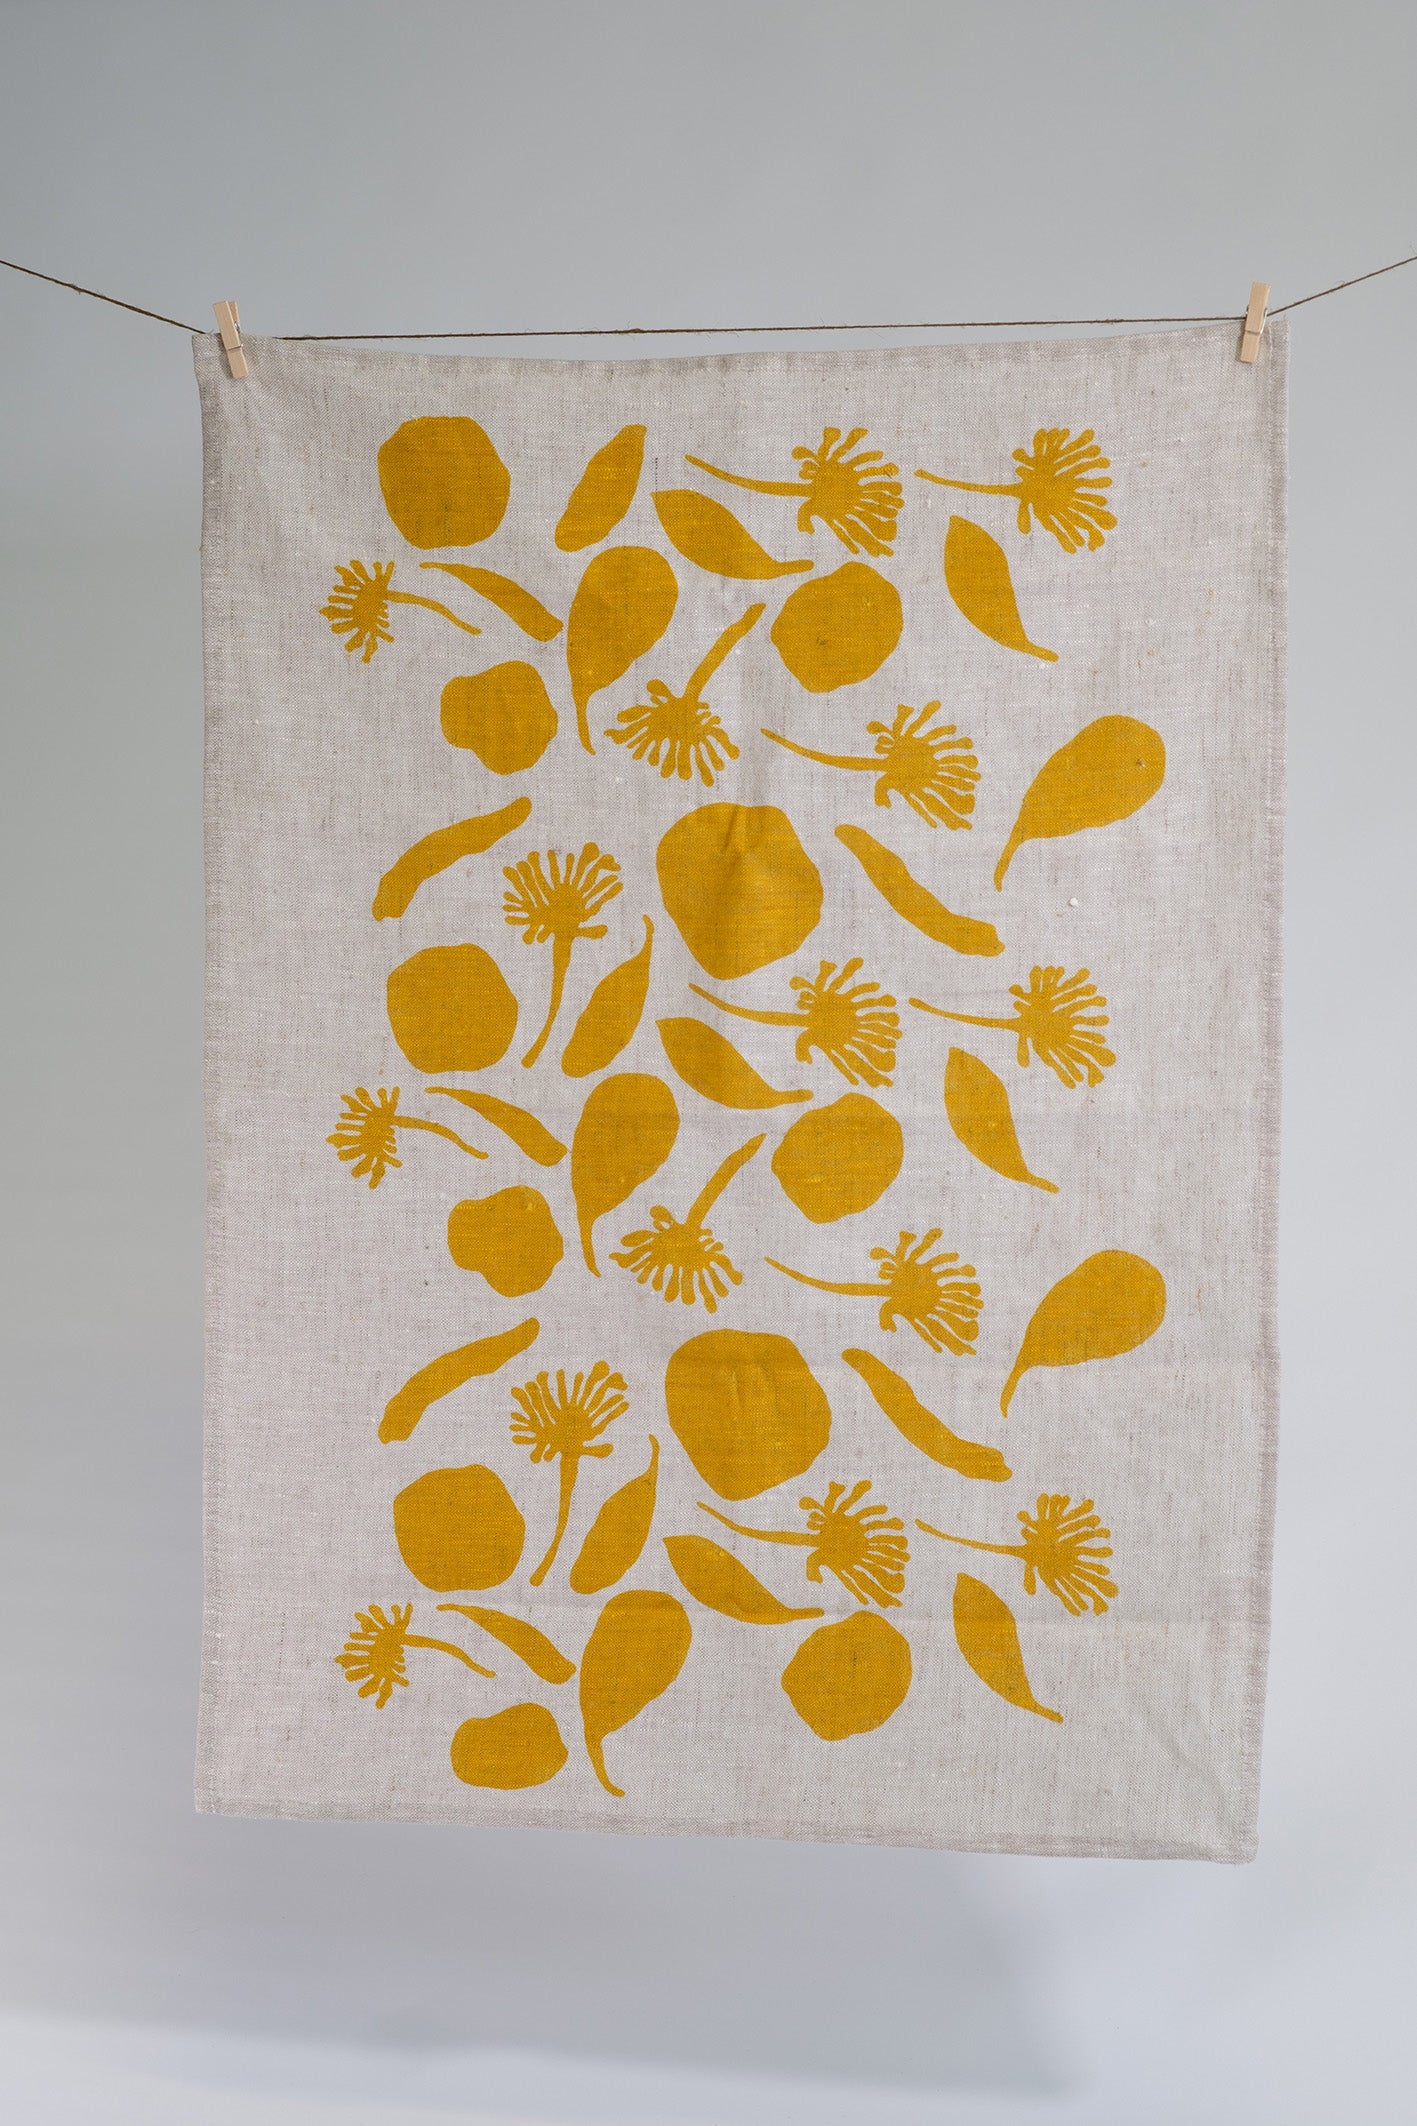 Linen tea towel screen printed with seedpod shapes in mustard. Printed and designed by Femke Textiles